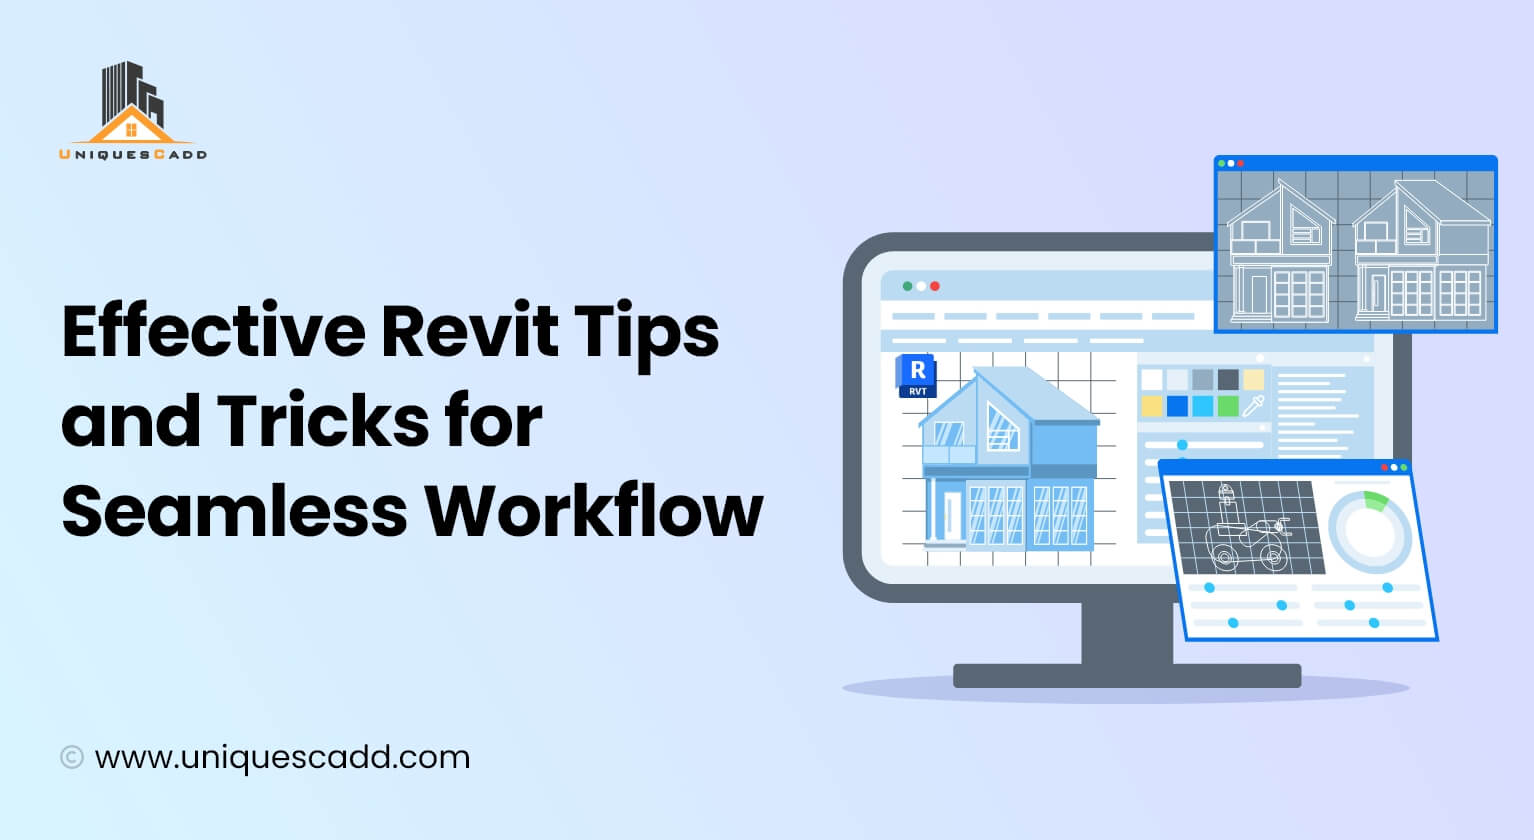 Effective Revit Tips and Tricks for Seamless Workflow